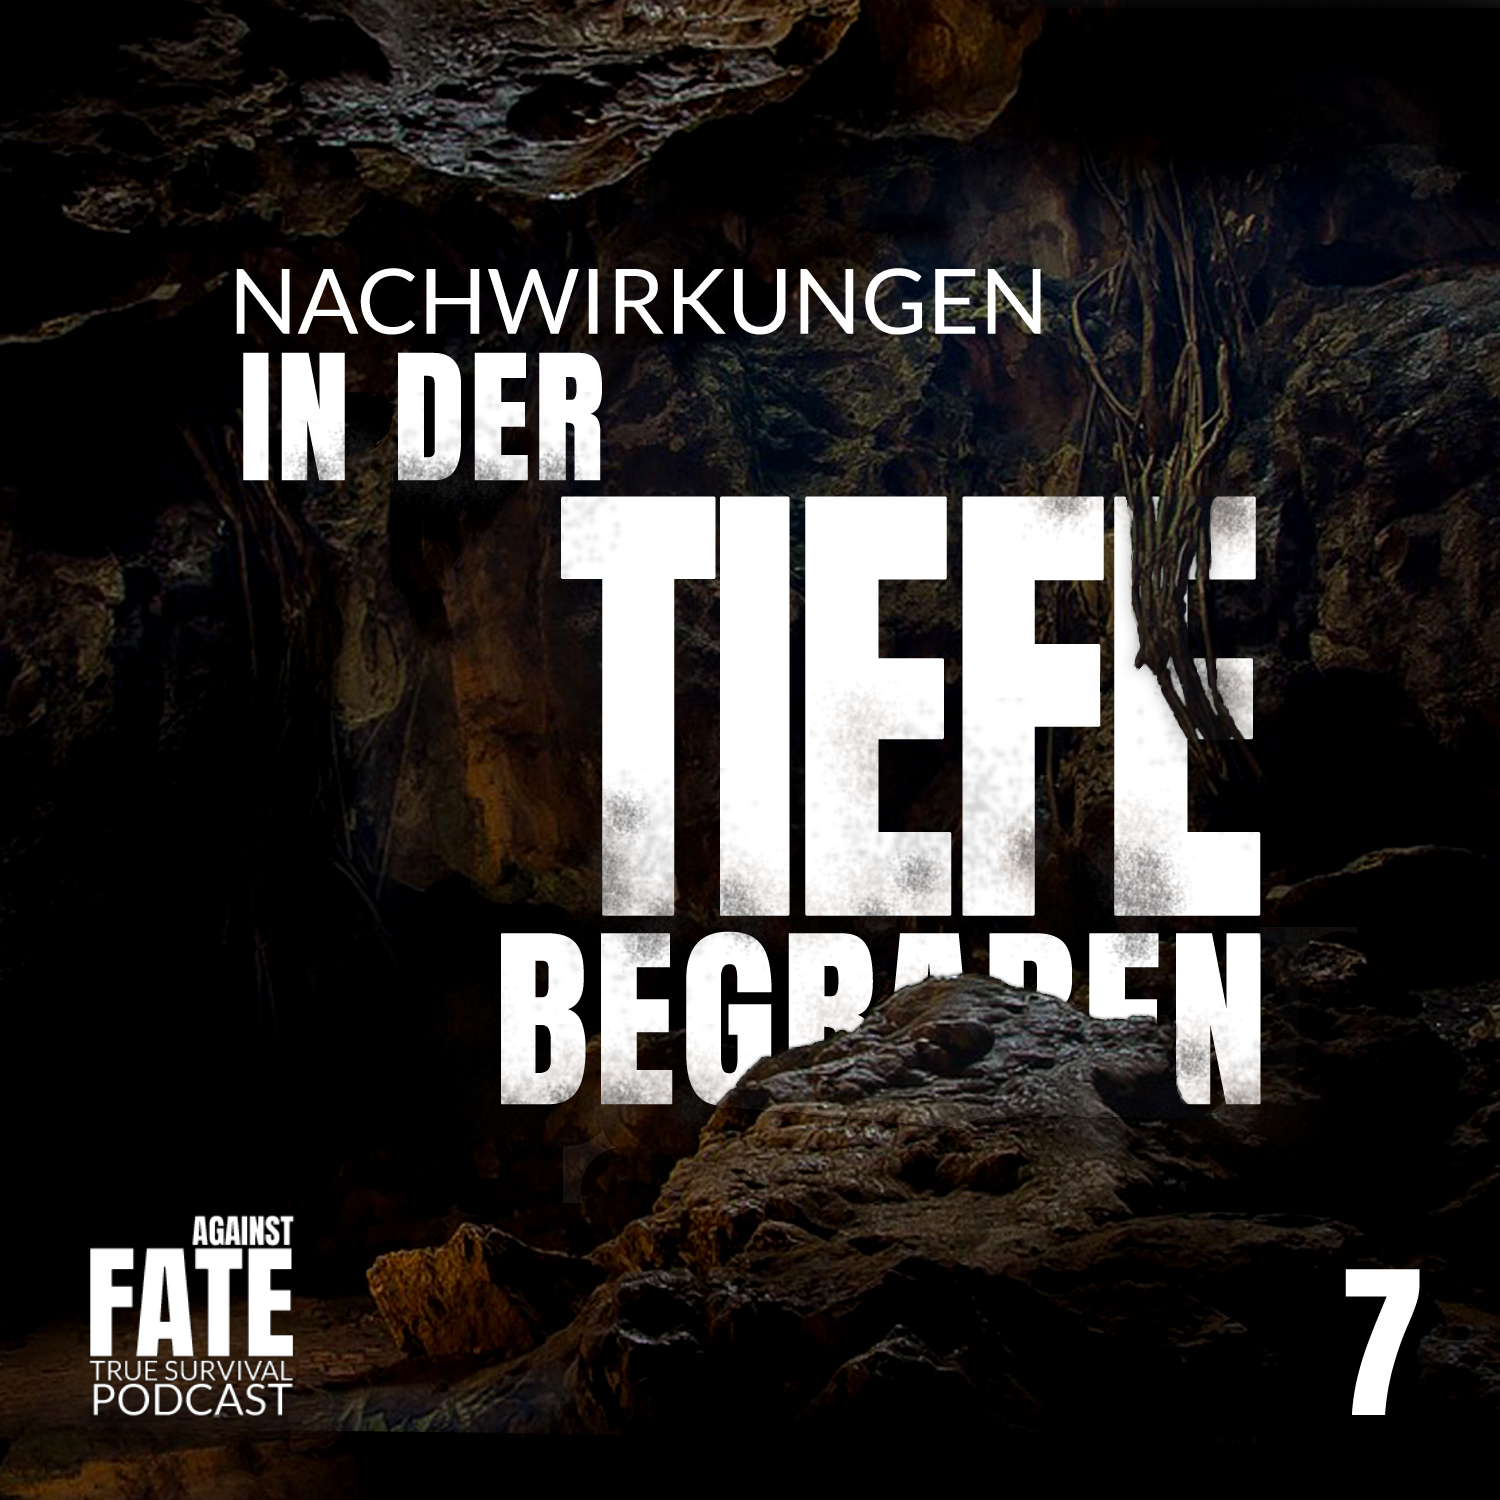 Tiefe-7-Cover